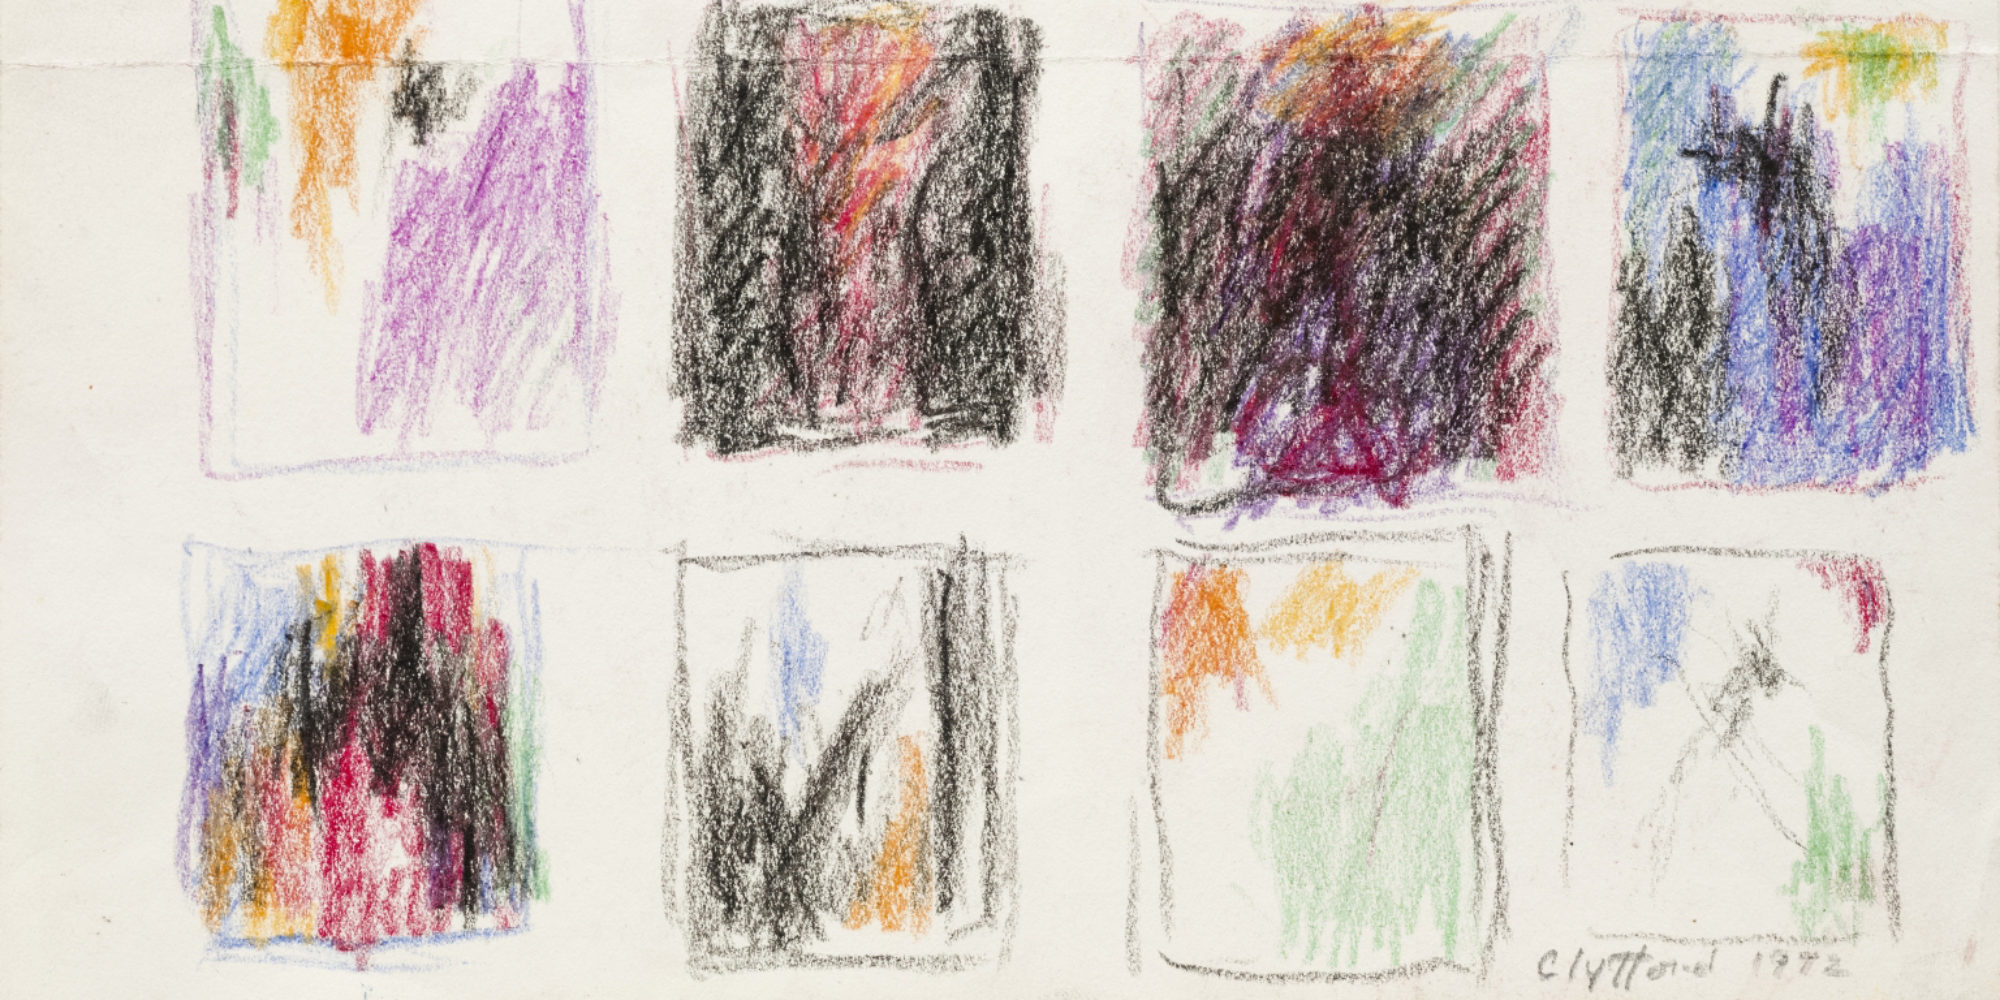 Crayon thumbnail drawings of abstract works by Clyfford Still